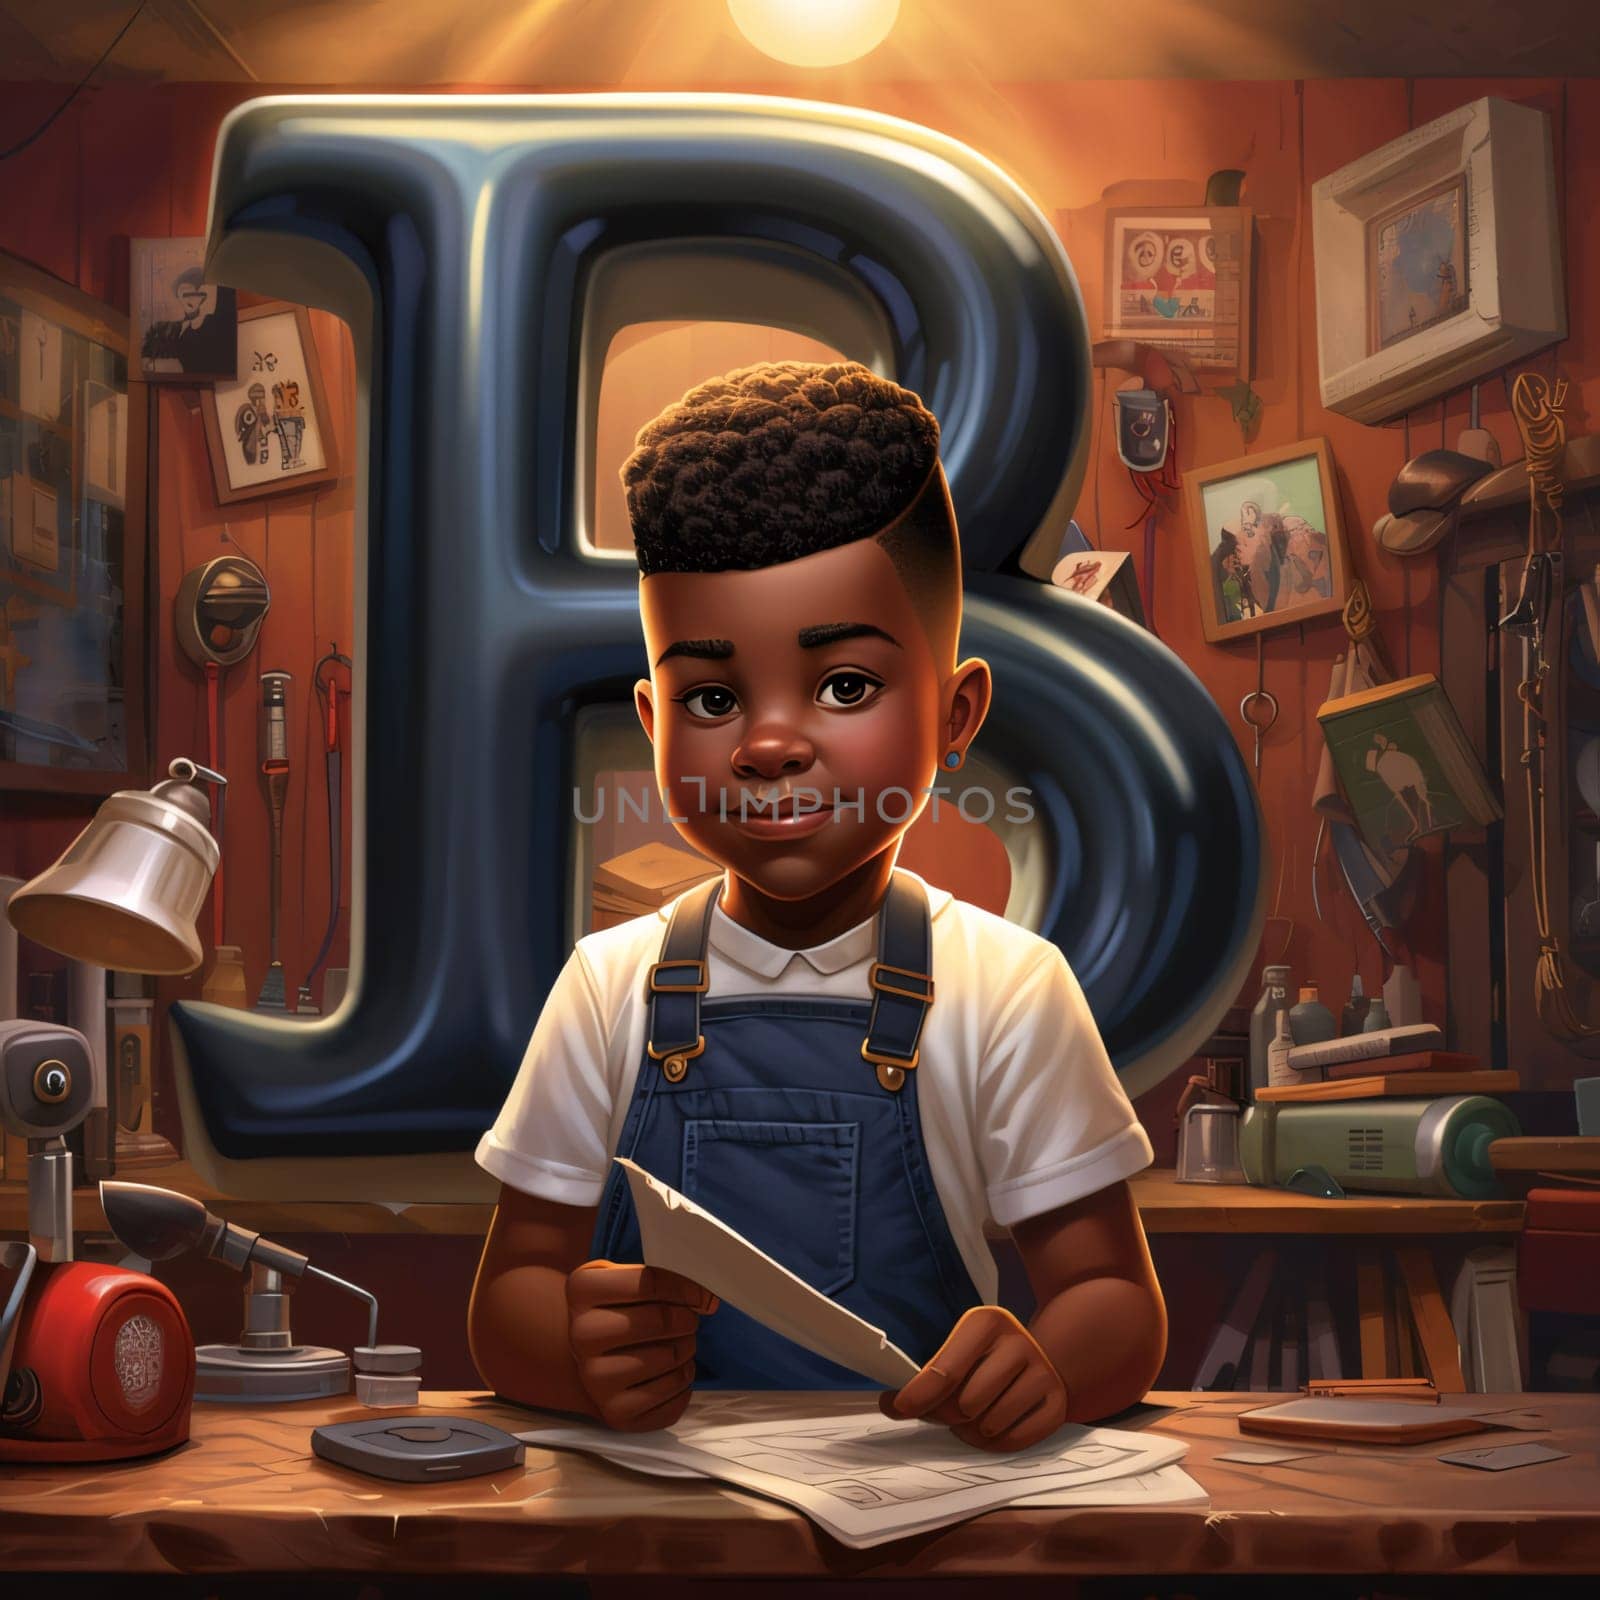 Graphic alphabet letters: Cute African American boy in a cafe reading a letter from the alphabet